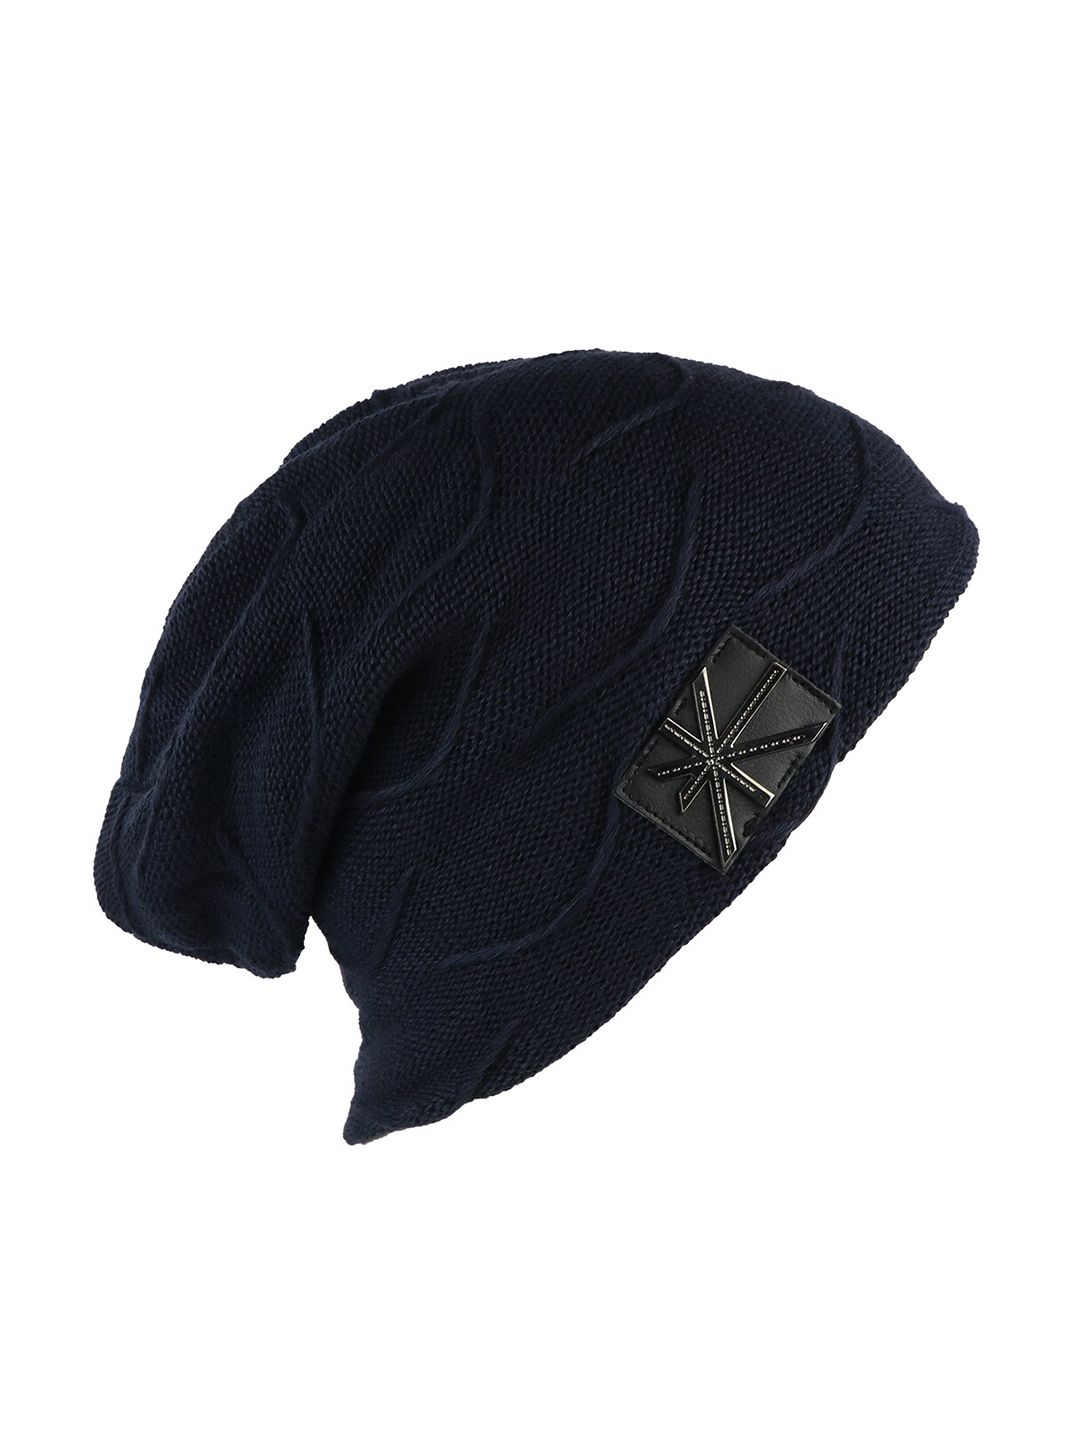 iSWEVEN Unisex Navy Blue Beanie Price in India